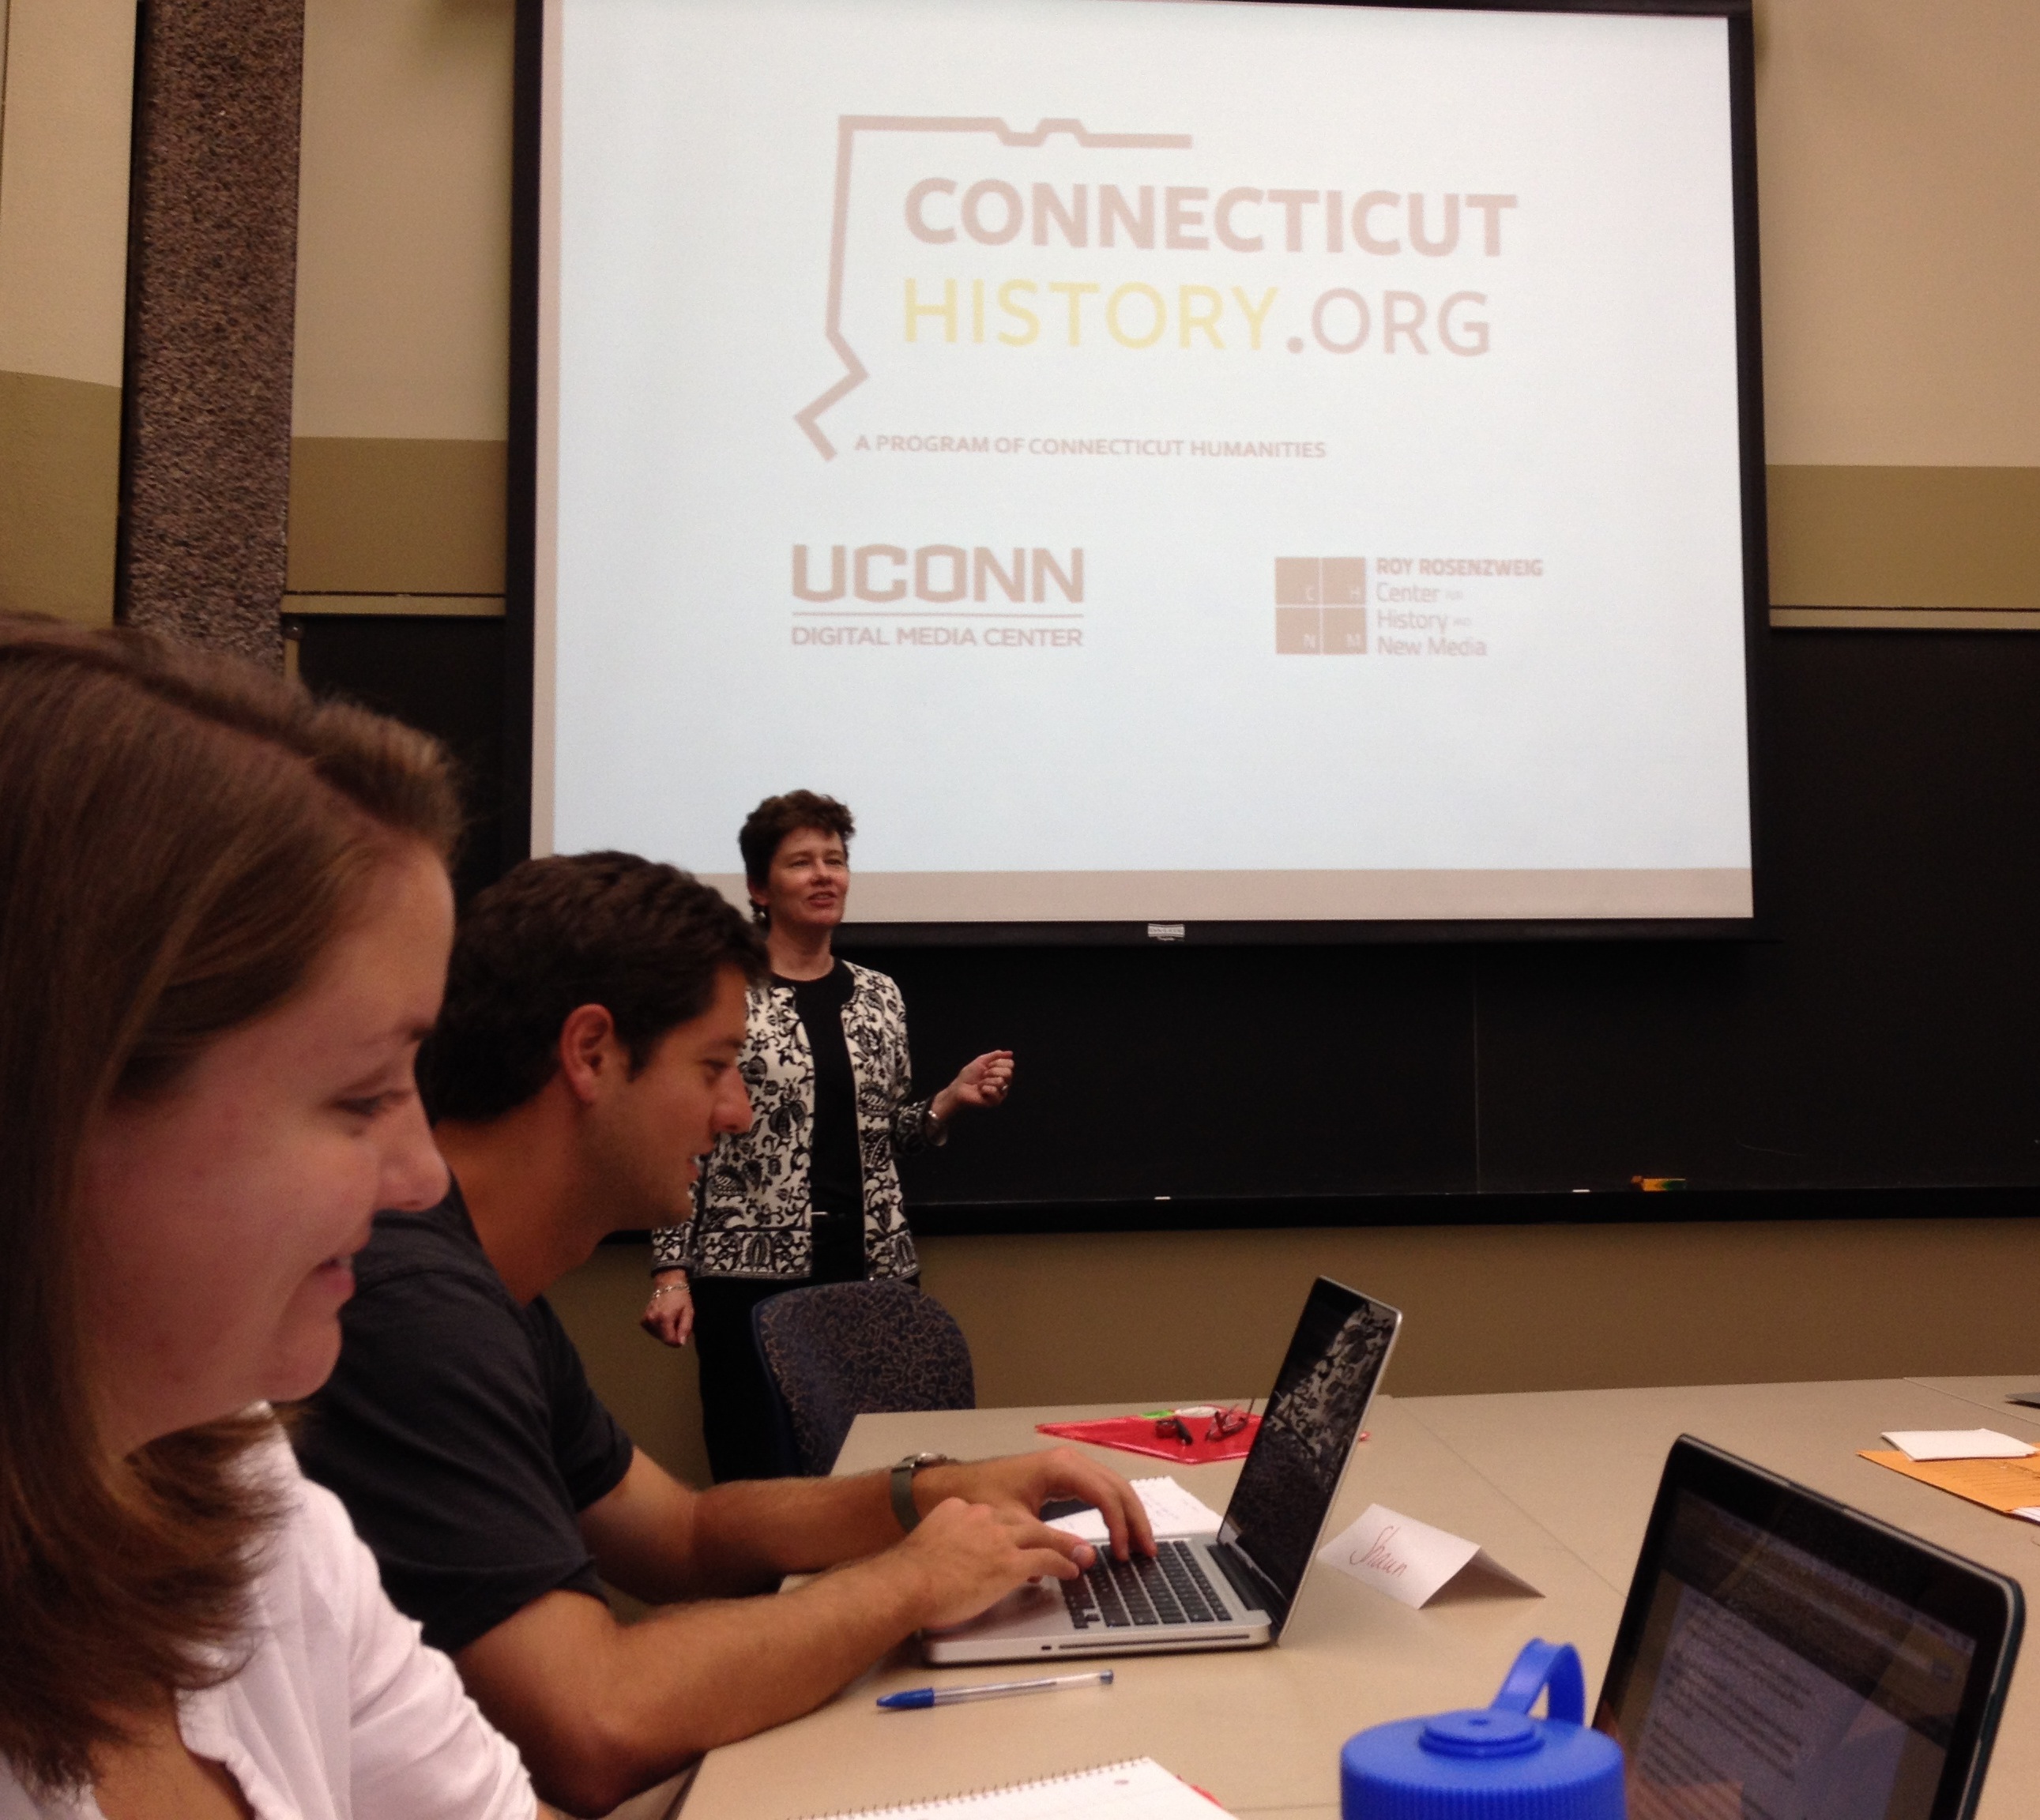 Clarissa Ceglio teaches Trinity students Emily Meehan and Sean McGann how to write for ConnecticutHistory.org.